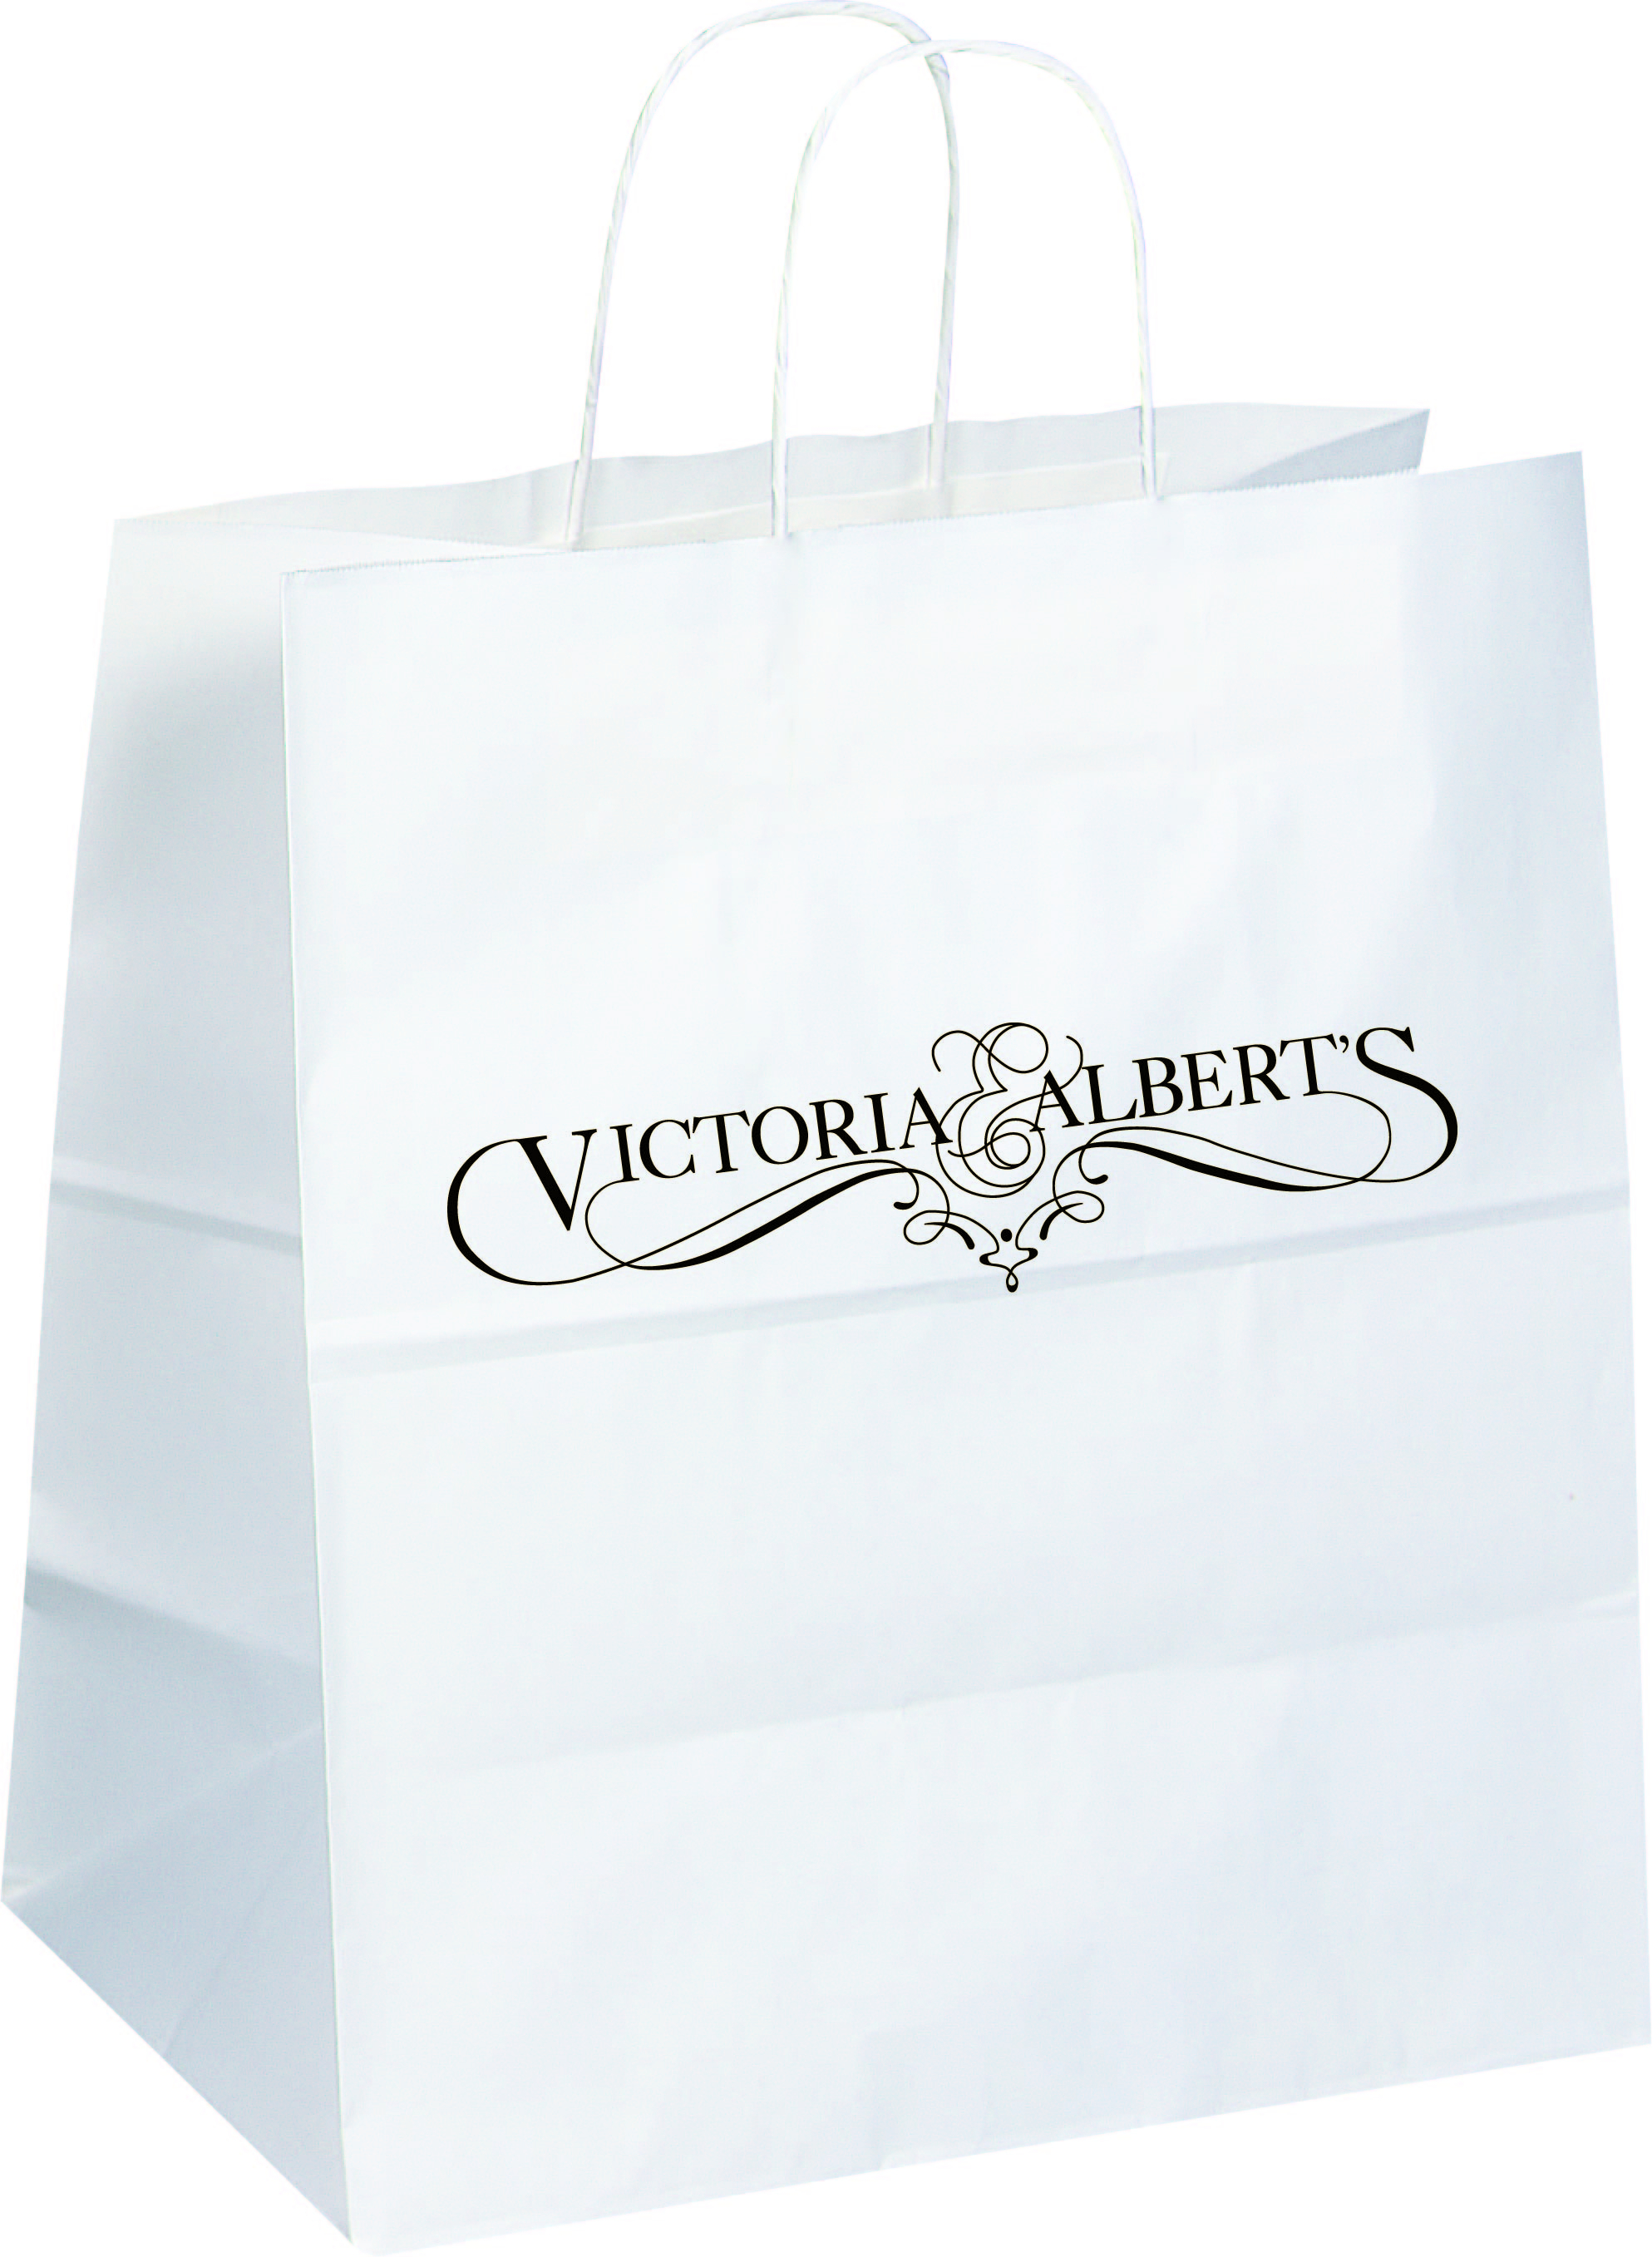 Custom Printed Paper Bags - Size 14.5" Wide x 9 " Gusset x 16.25" High